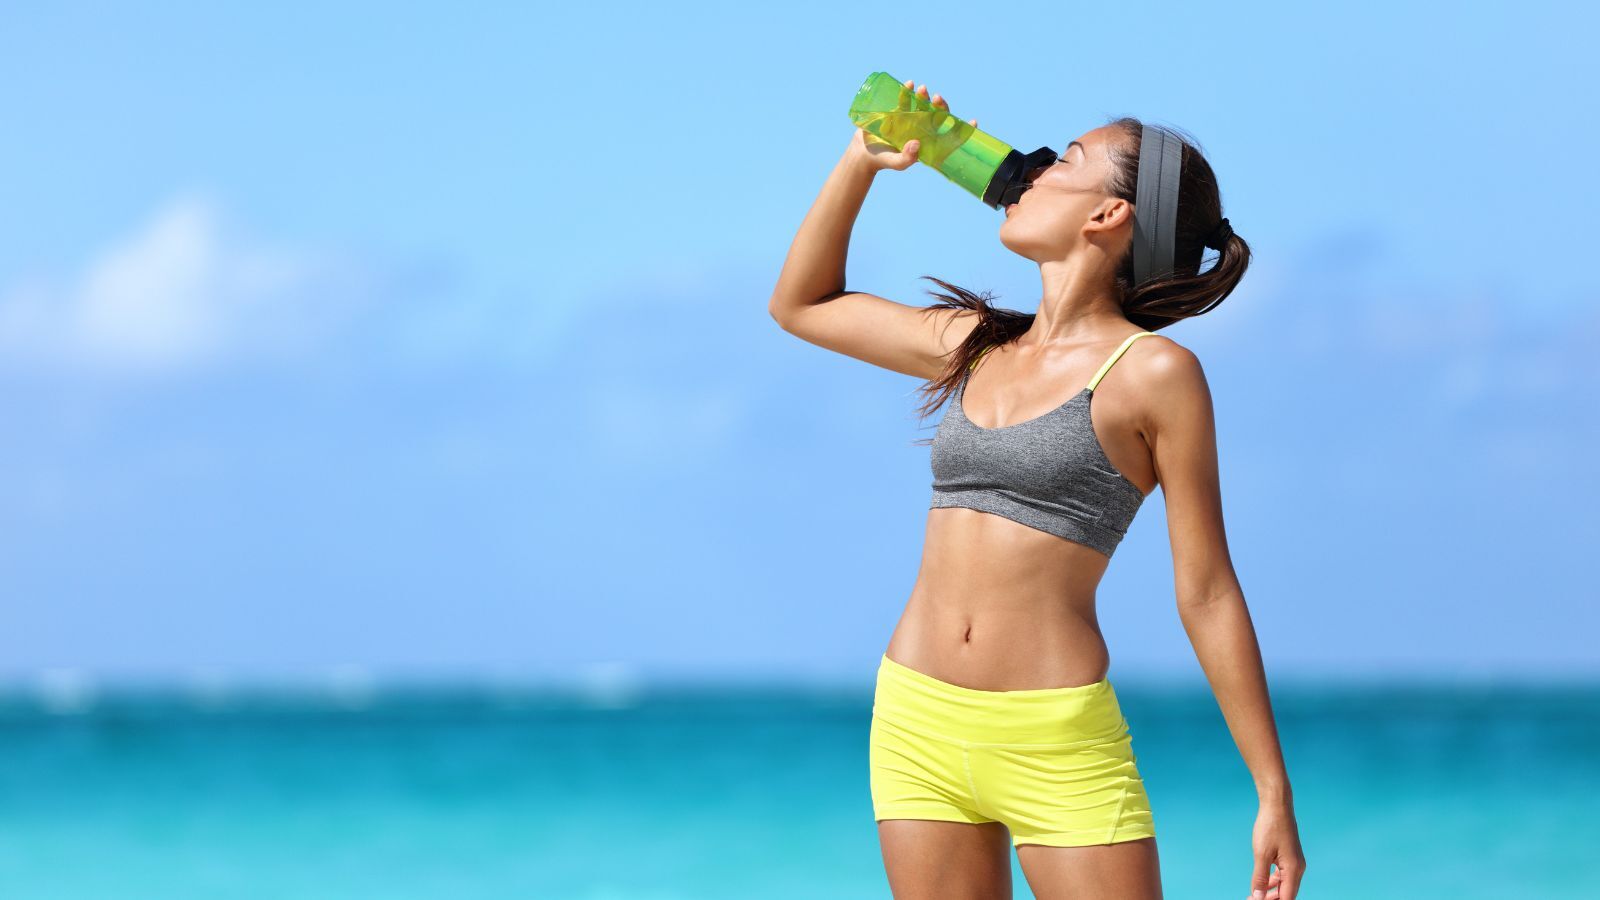 13 Best Hydration Drink Brands to Help You Refuel at Anytime